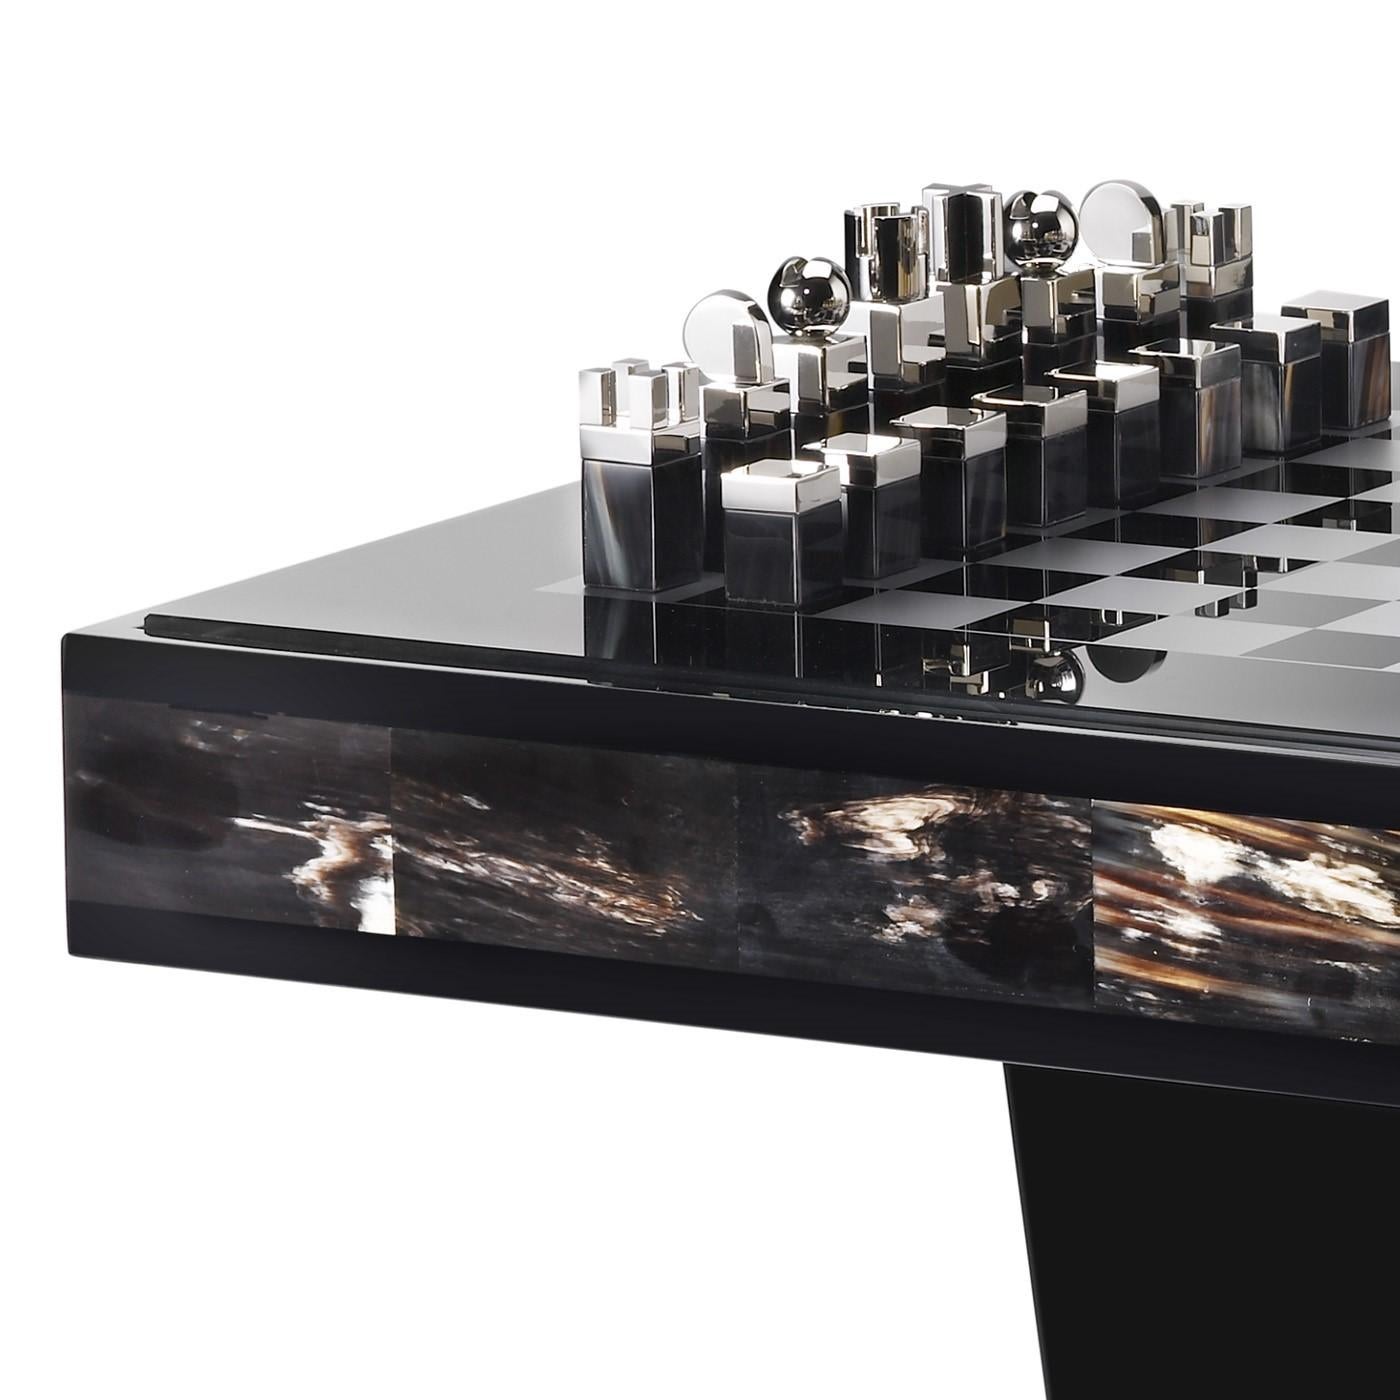 This stunning Alfio Chess Table is crafted in dark horn and black lacquered wood and features a top in smoked tempered glass with a silver chessboard design. The splendid chessboard pieces are made from horn and palladium plated brass. Designed by